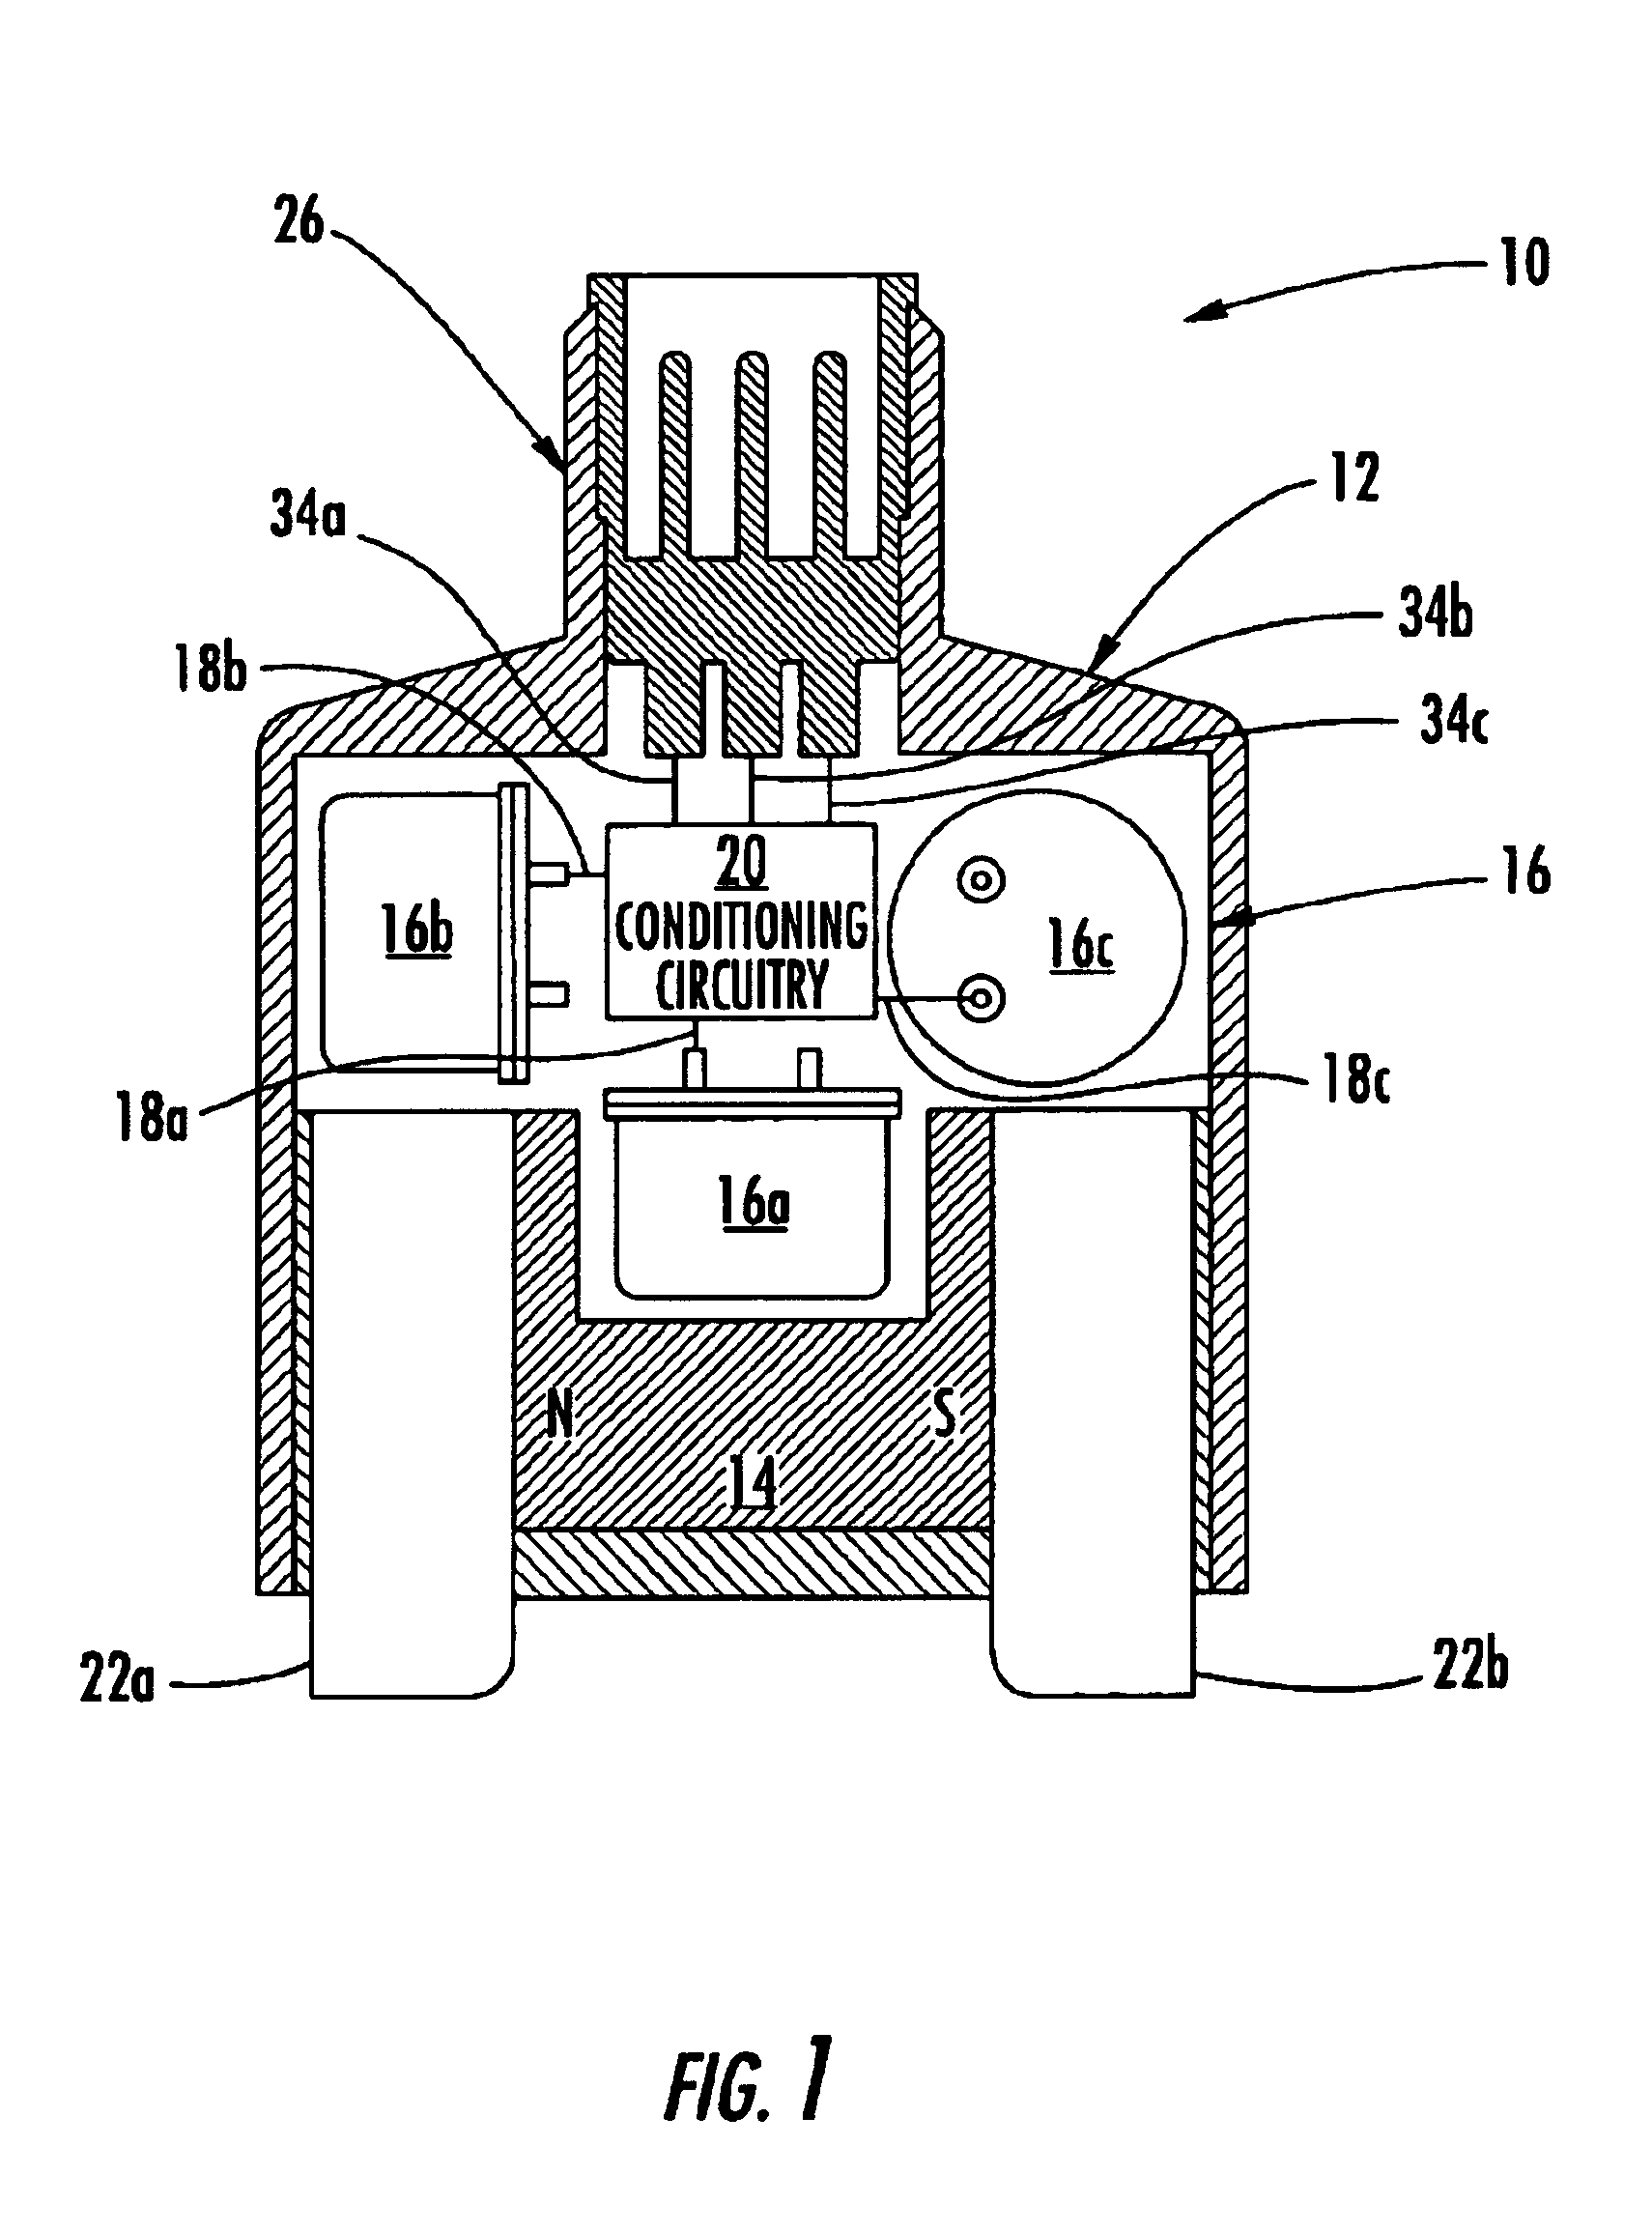 Multi-axis vibration sensor with integral magnet